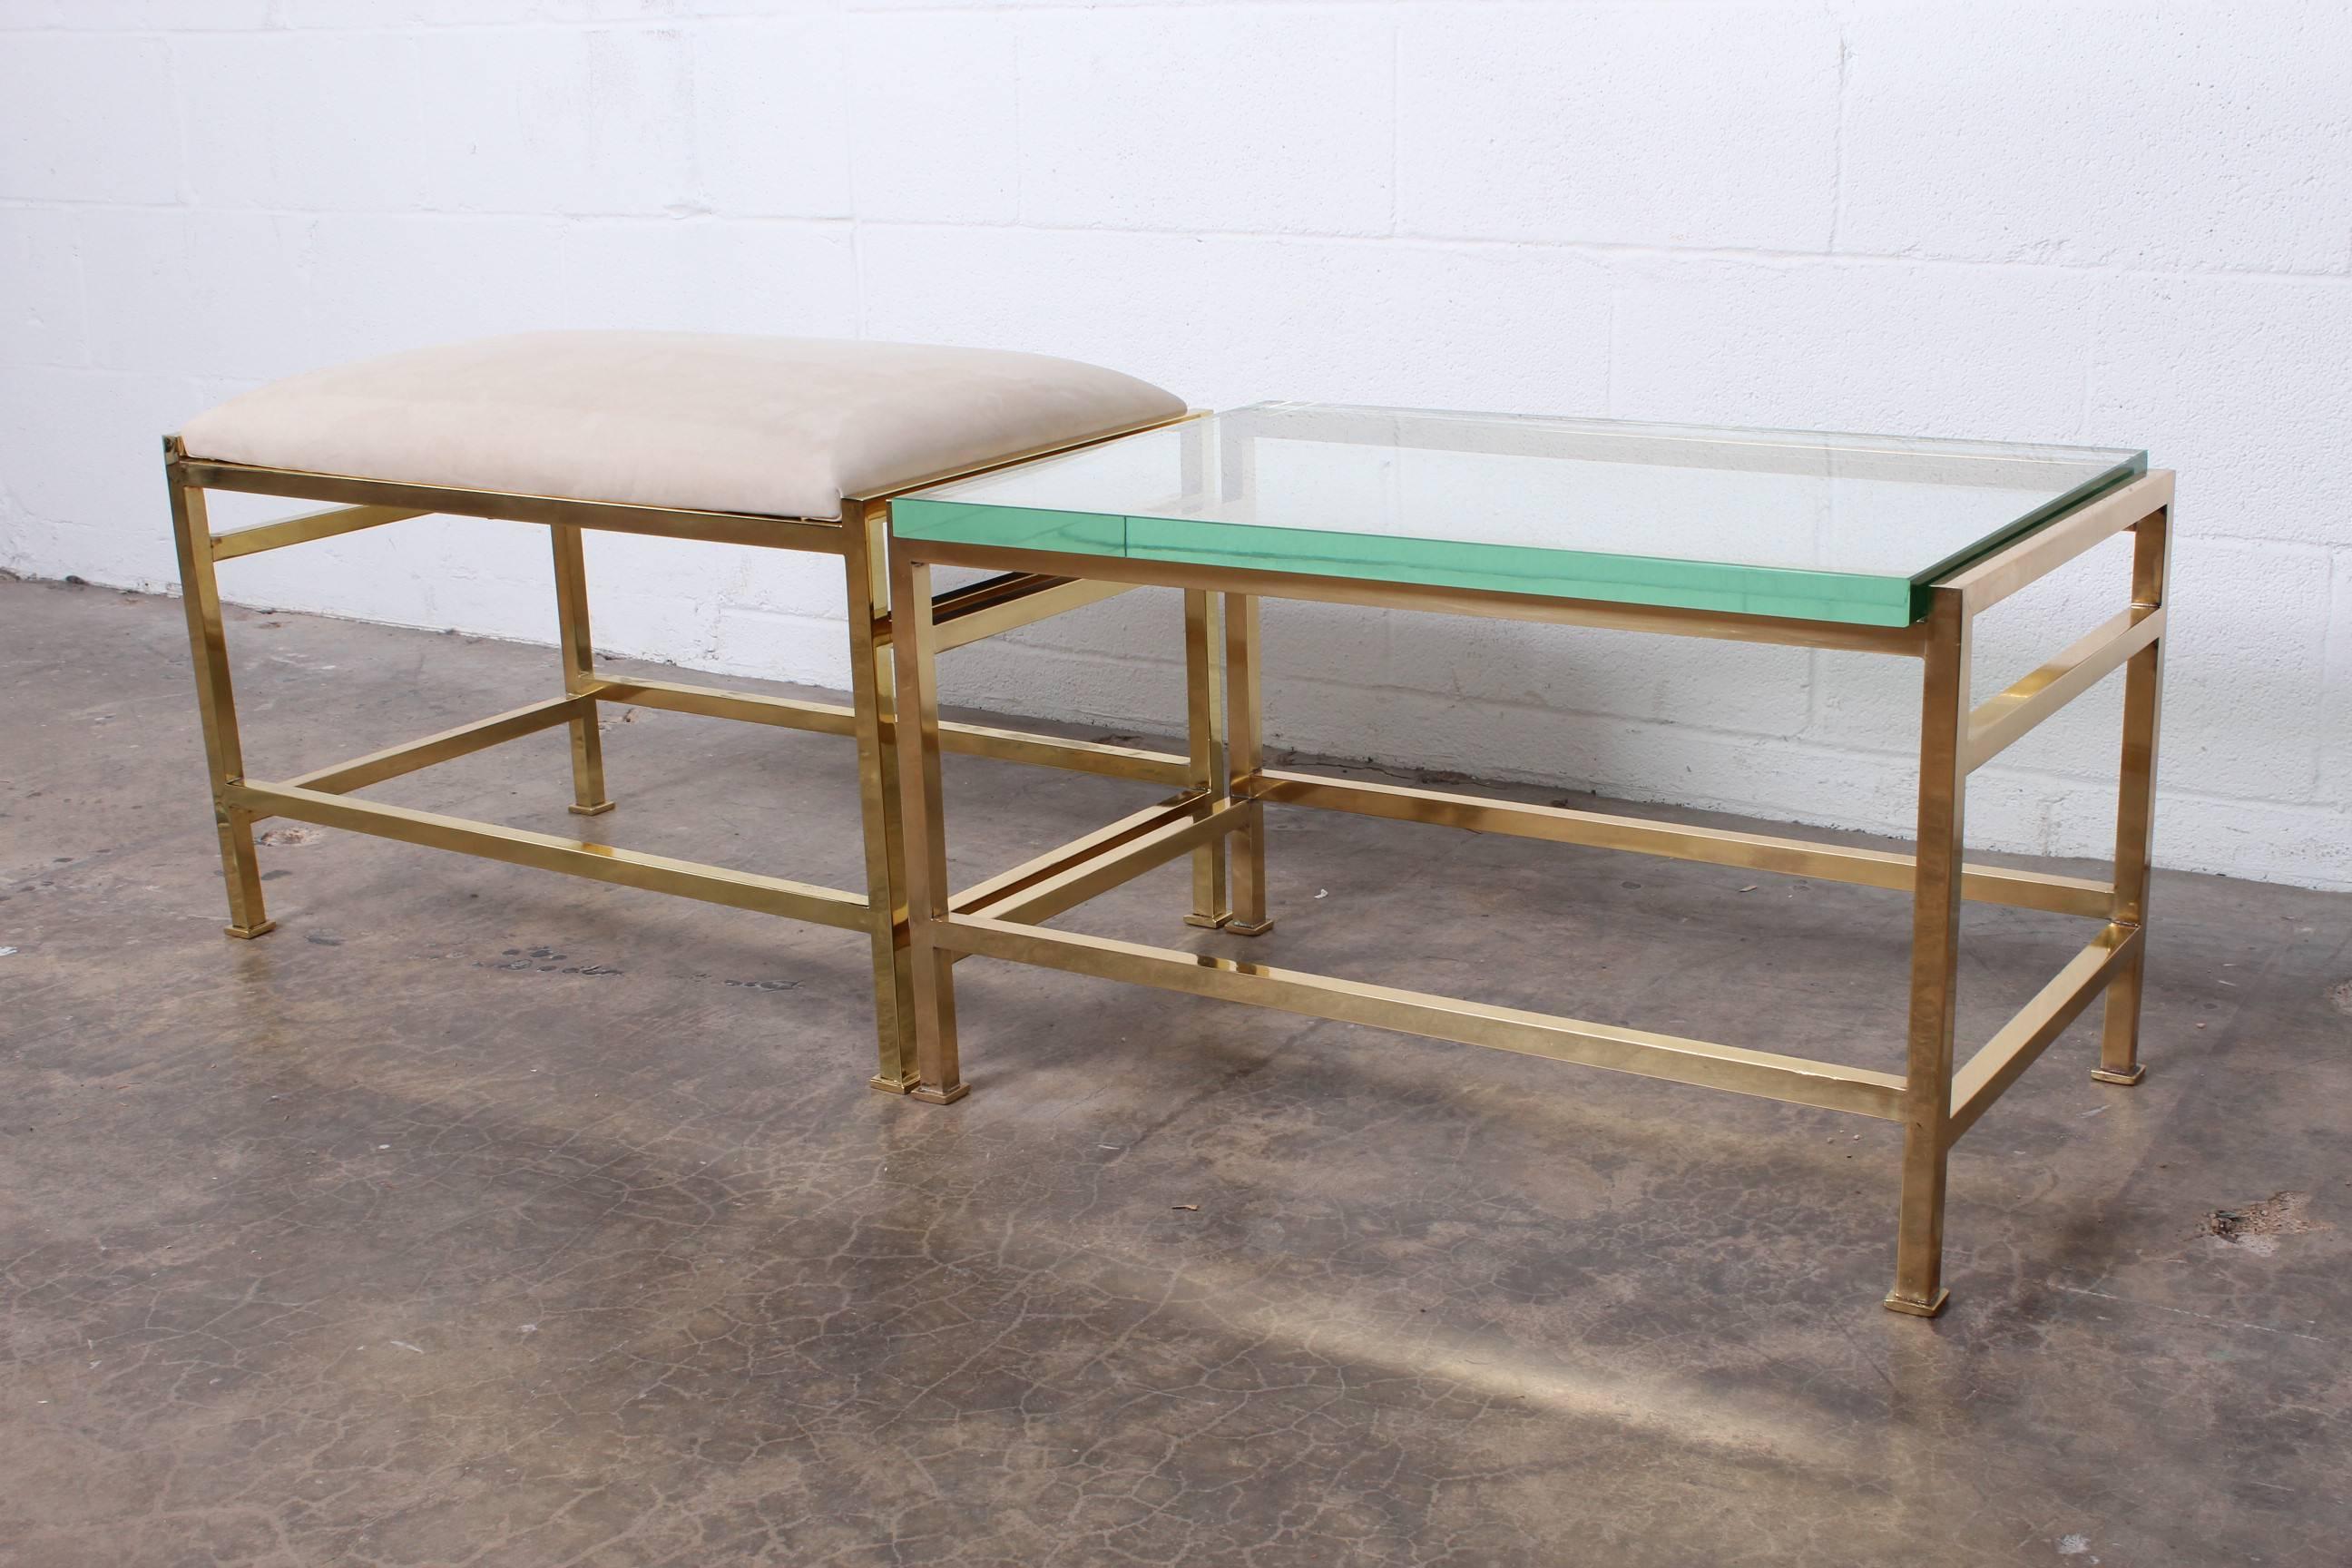 Mid-20th Century Brass Bench and Table by Edward Wormley for Dunbar